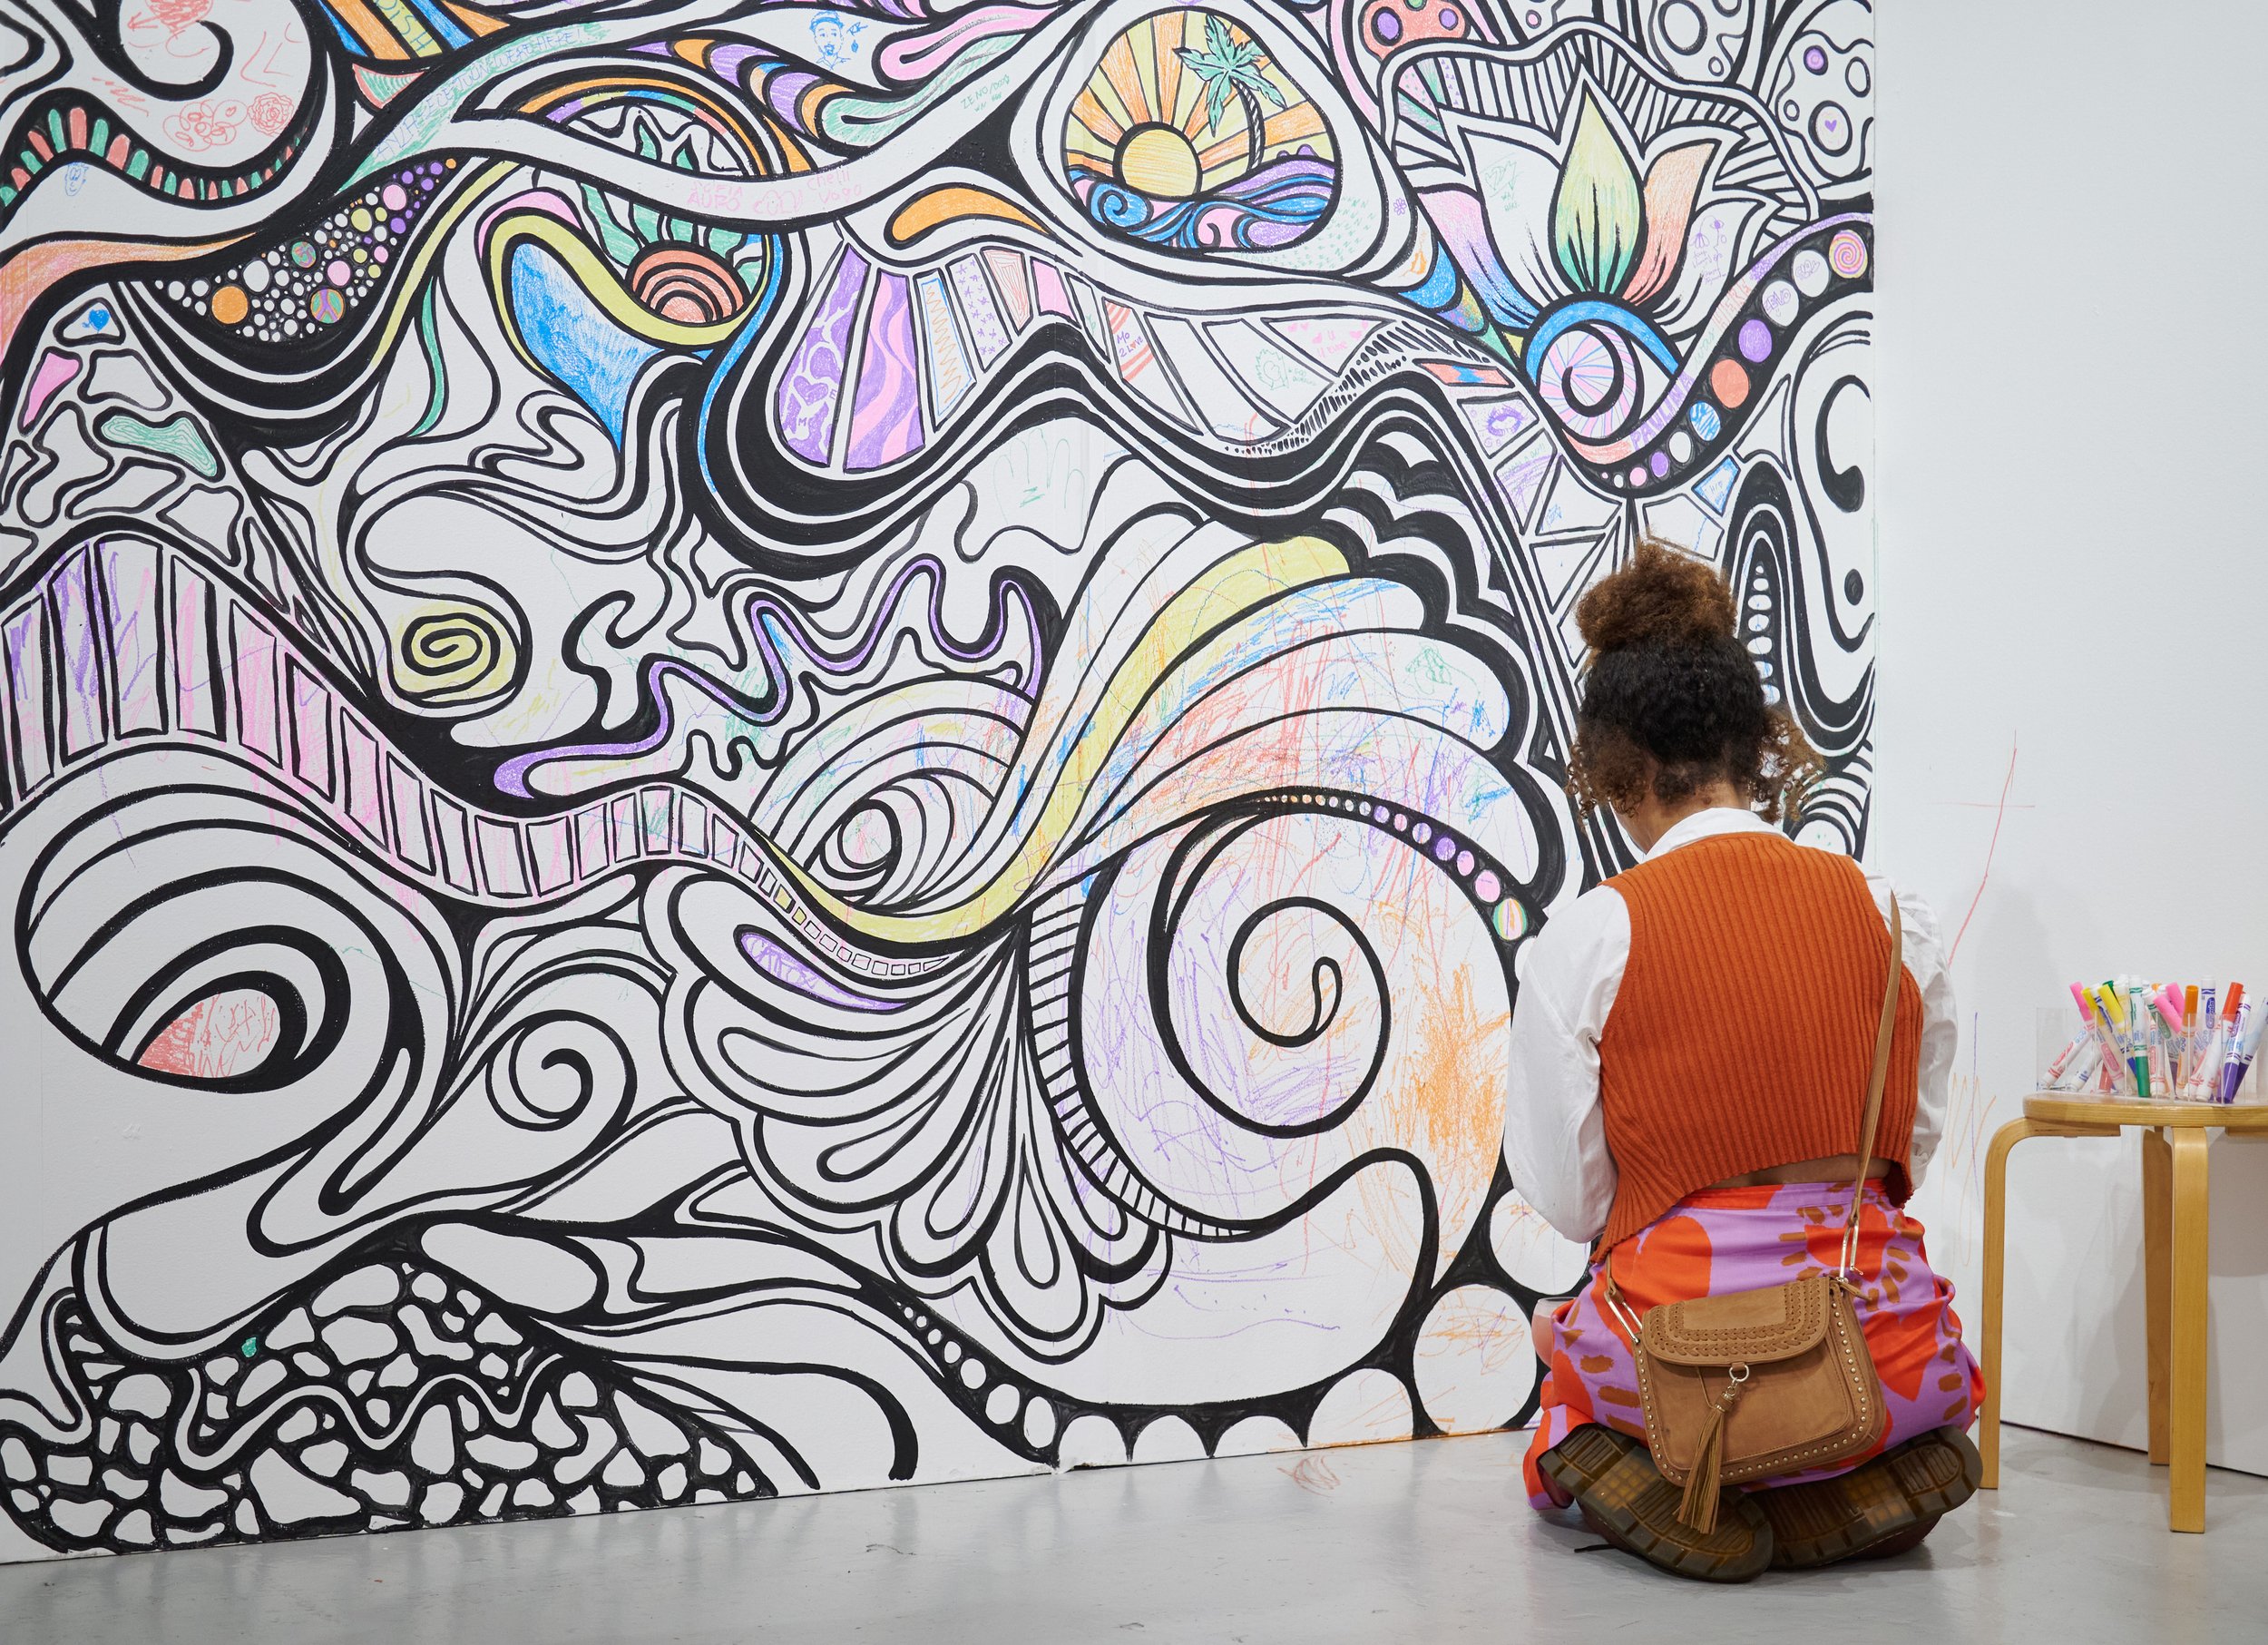  Attendee Anika Ajaga draws on artist Kelsey Griffen's "Interactive Mural" at The Other Art Fair on Thursday, Sept. 22, 2022, at The Barker Hangar in Santa Monica, Calif. (Nicholas McCall | The Corsair) 